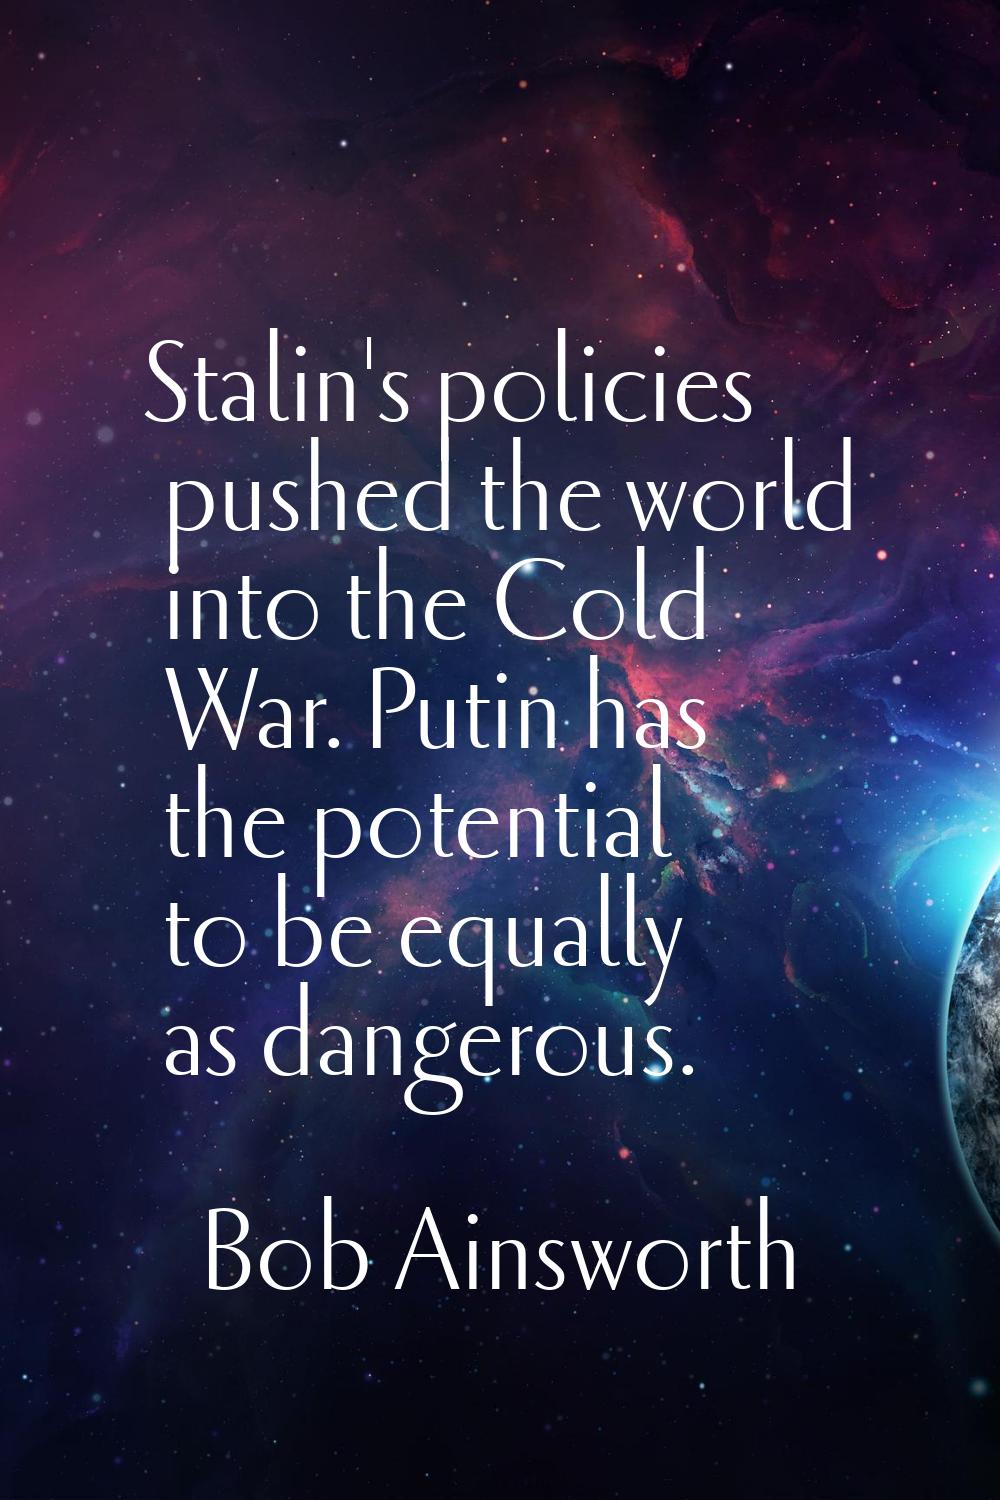 Stalin's policies pushed the world into the Cold War. Putin has the potential to be equally as dang